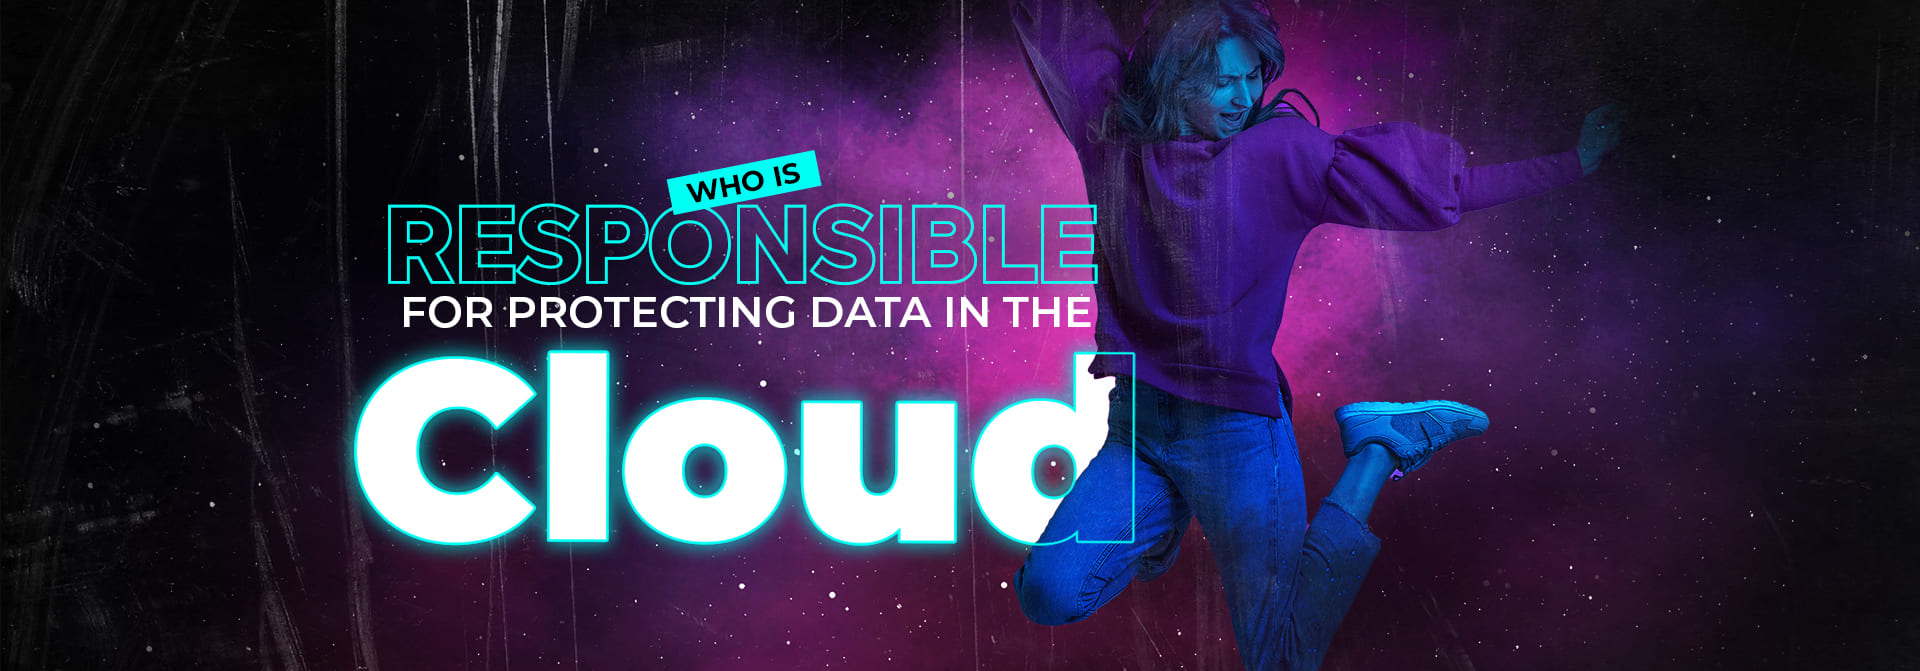 protecting data in the Cloud